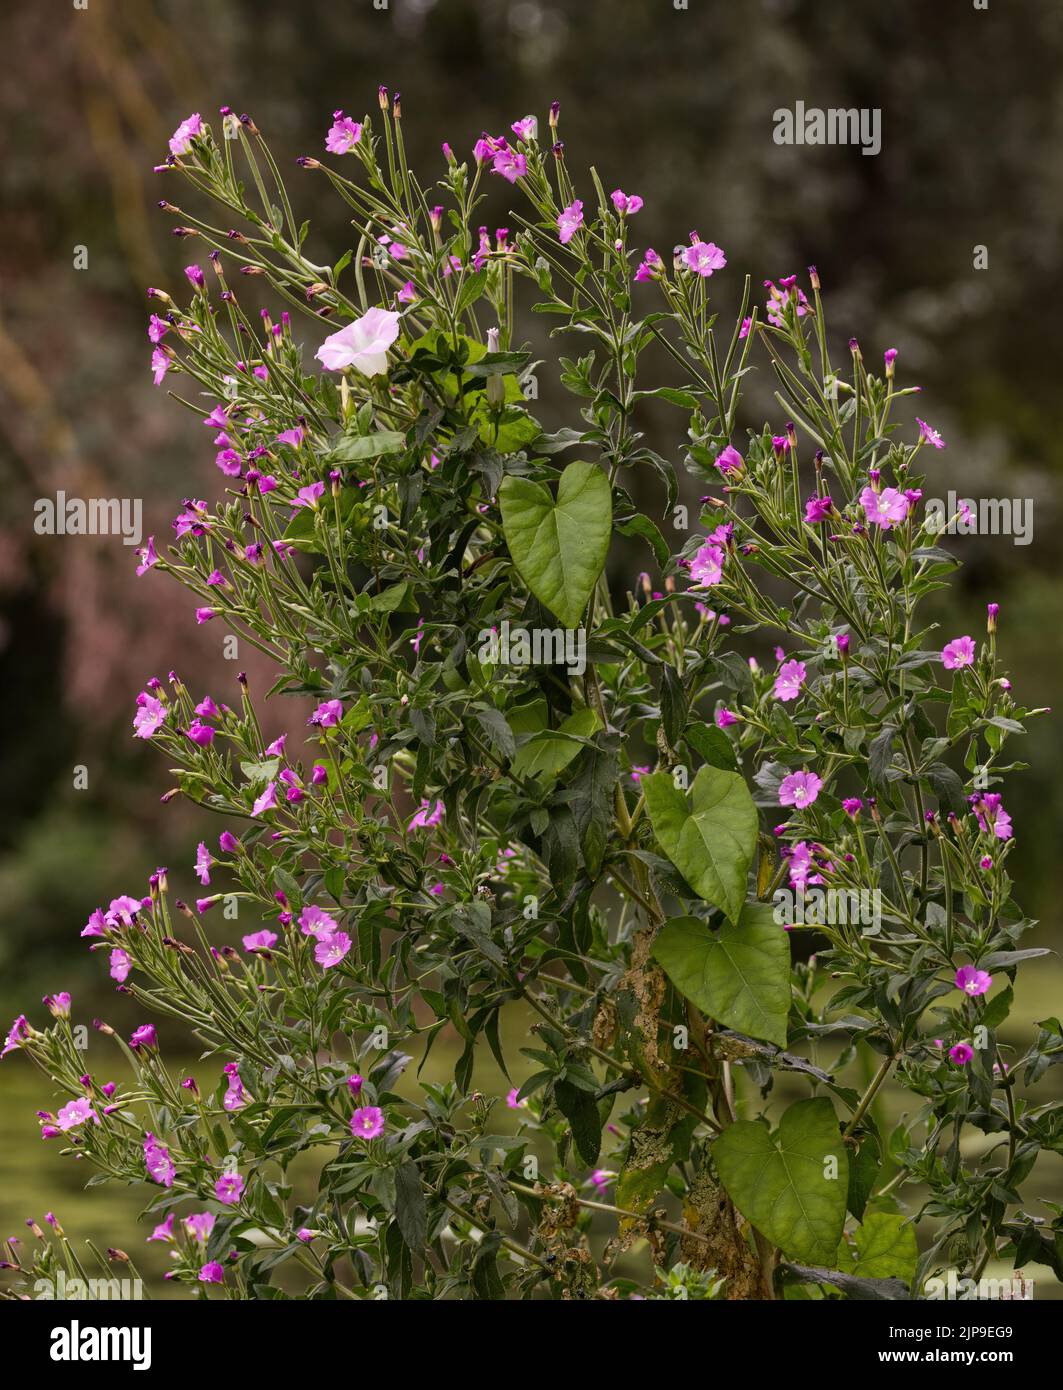 Leaves and a single white flower of hedge bindweed Calystegia sepium growing up and among the pink flowers of great willowherb, Stock Photo